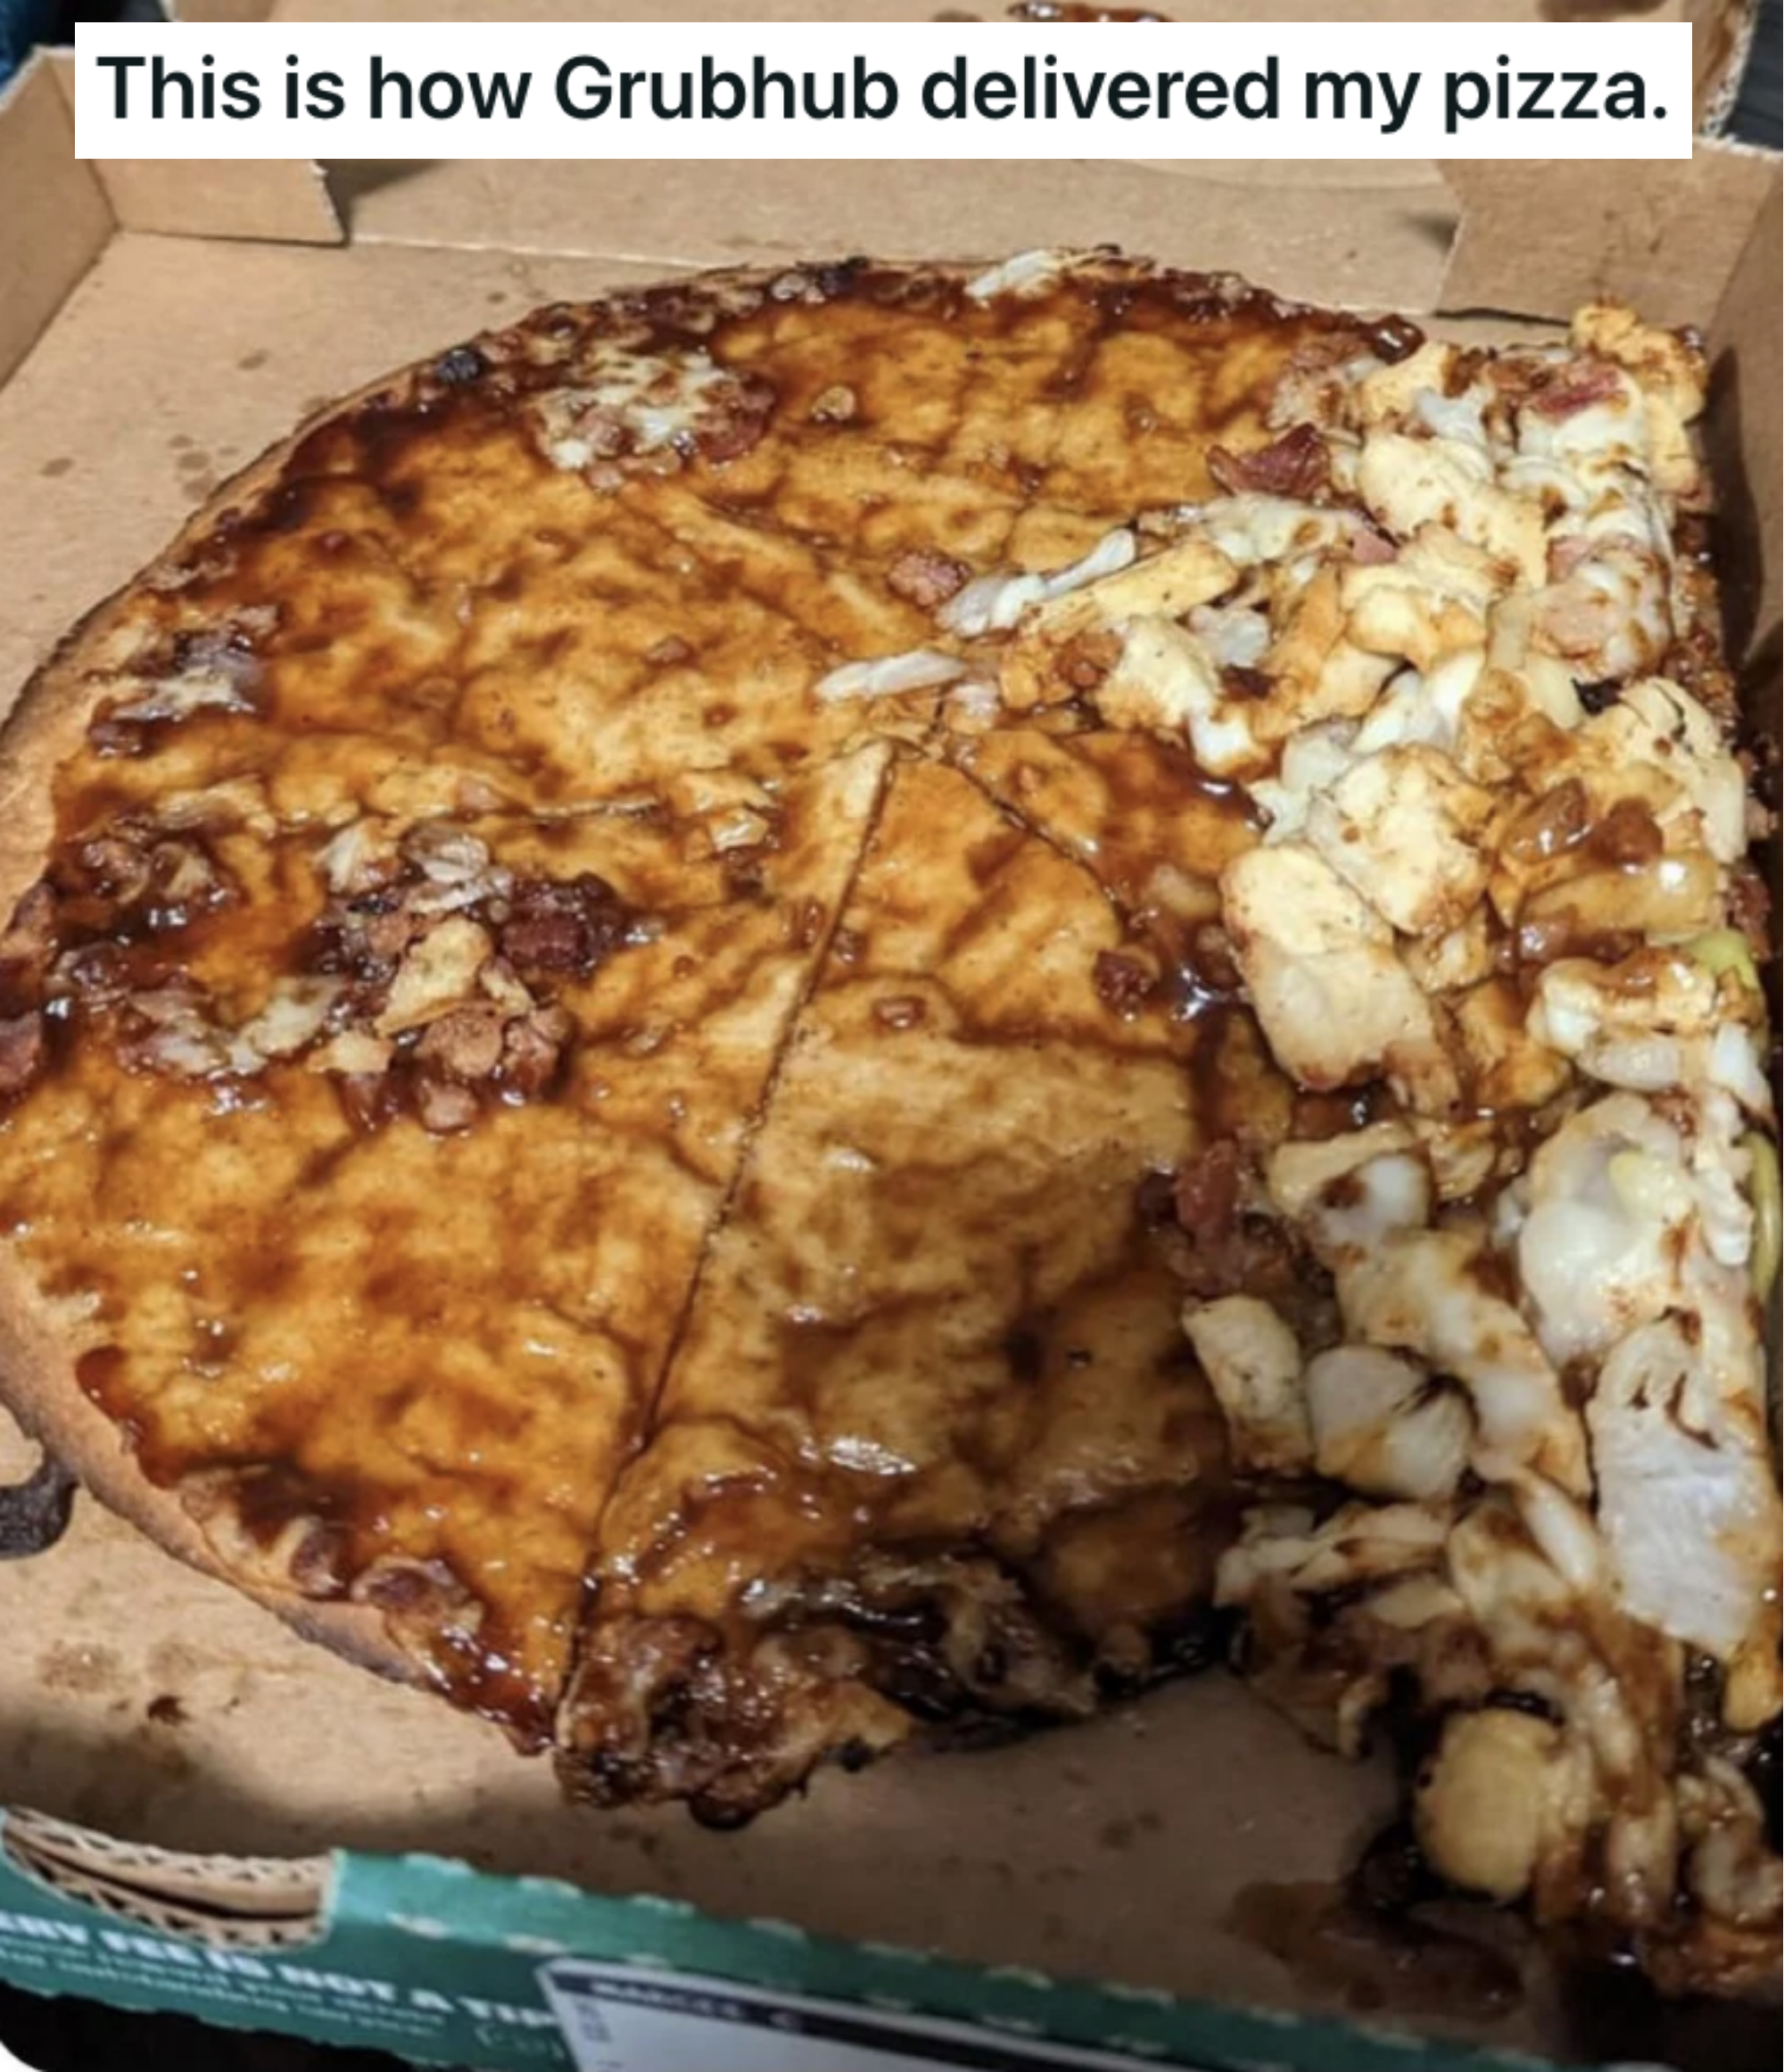 &quot;This is how Grubhub delivered my pizza.&quot;